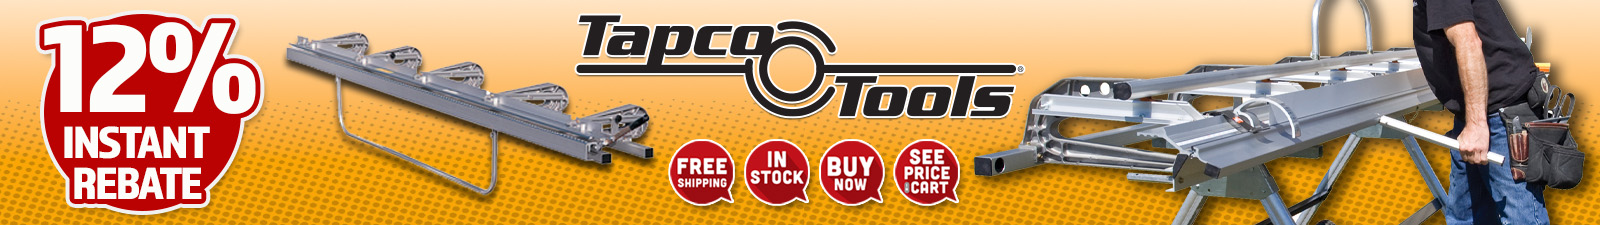 Tapco Tool Systems Discount